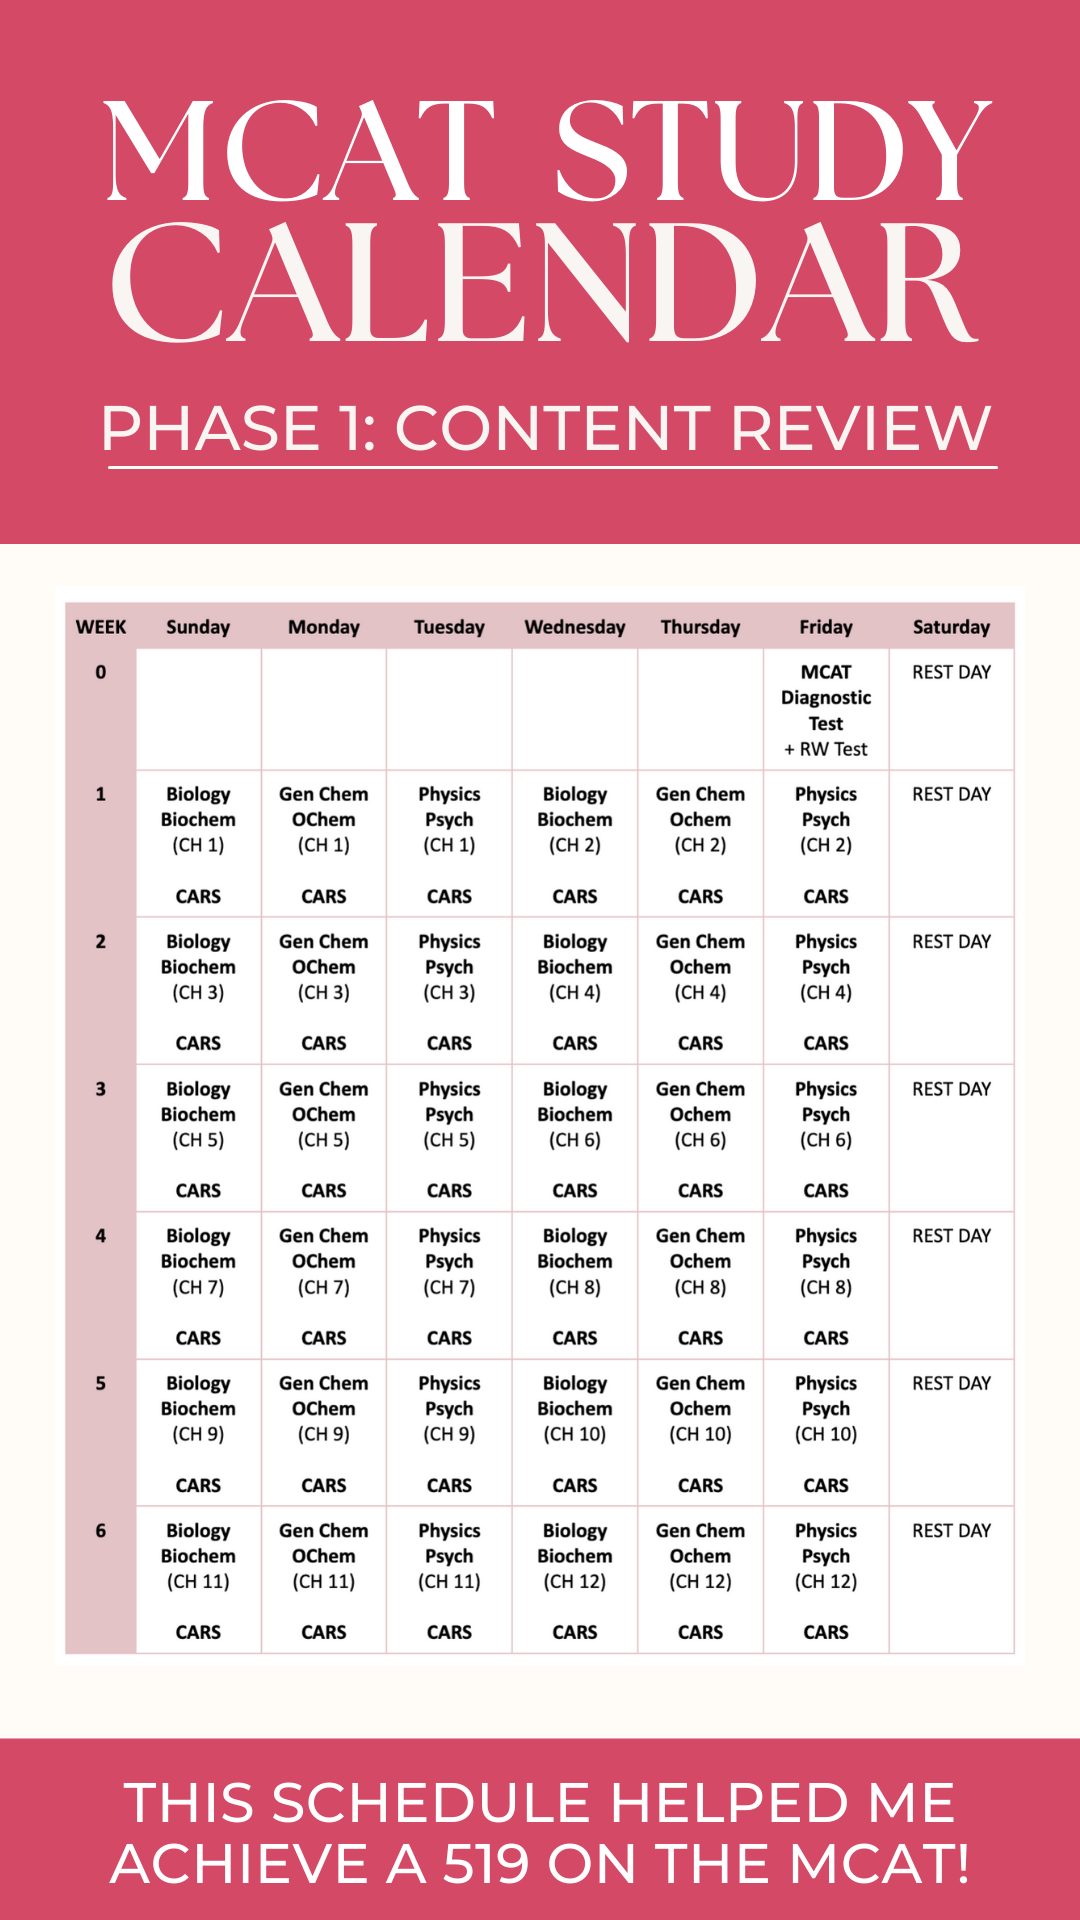 MCAT Content Review Calendar and Study Schedule that Helped Me Score a